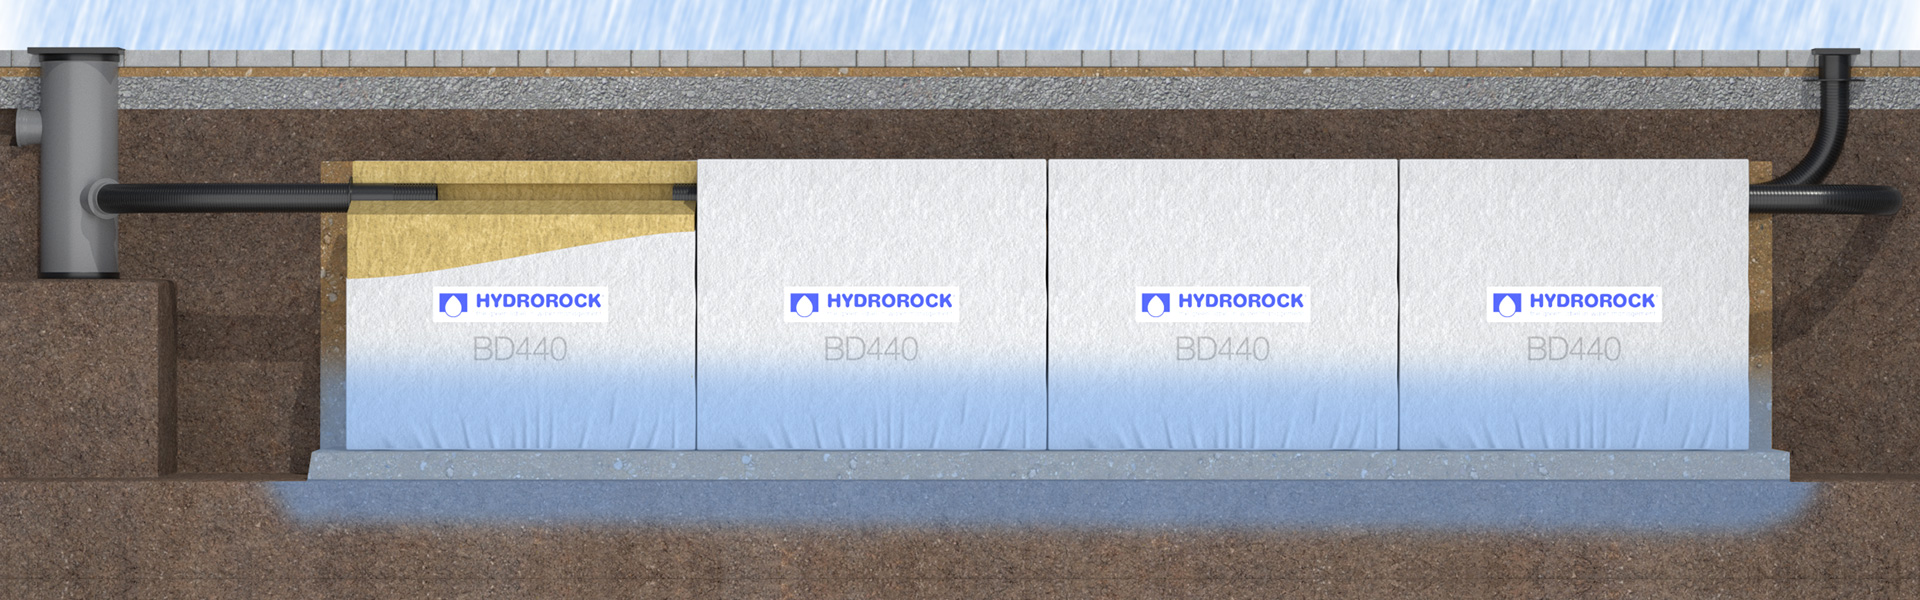 Hydrorock Infiltration